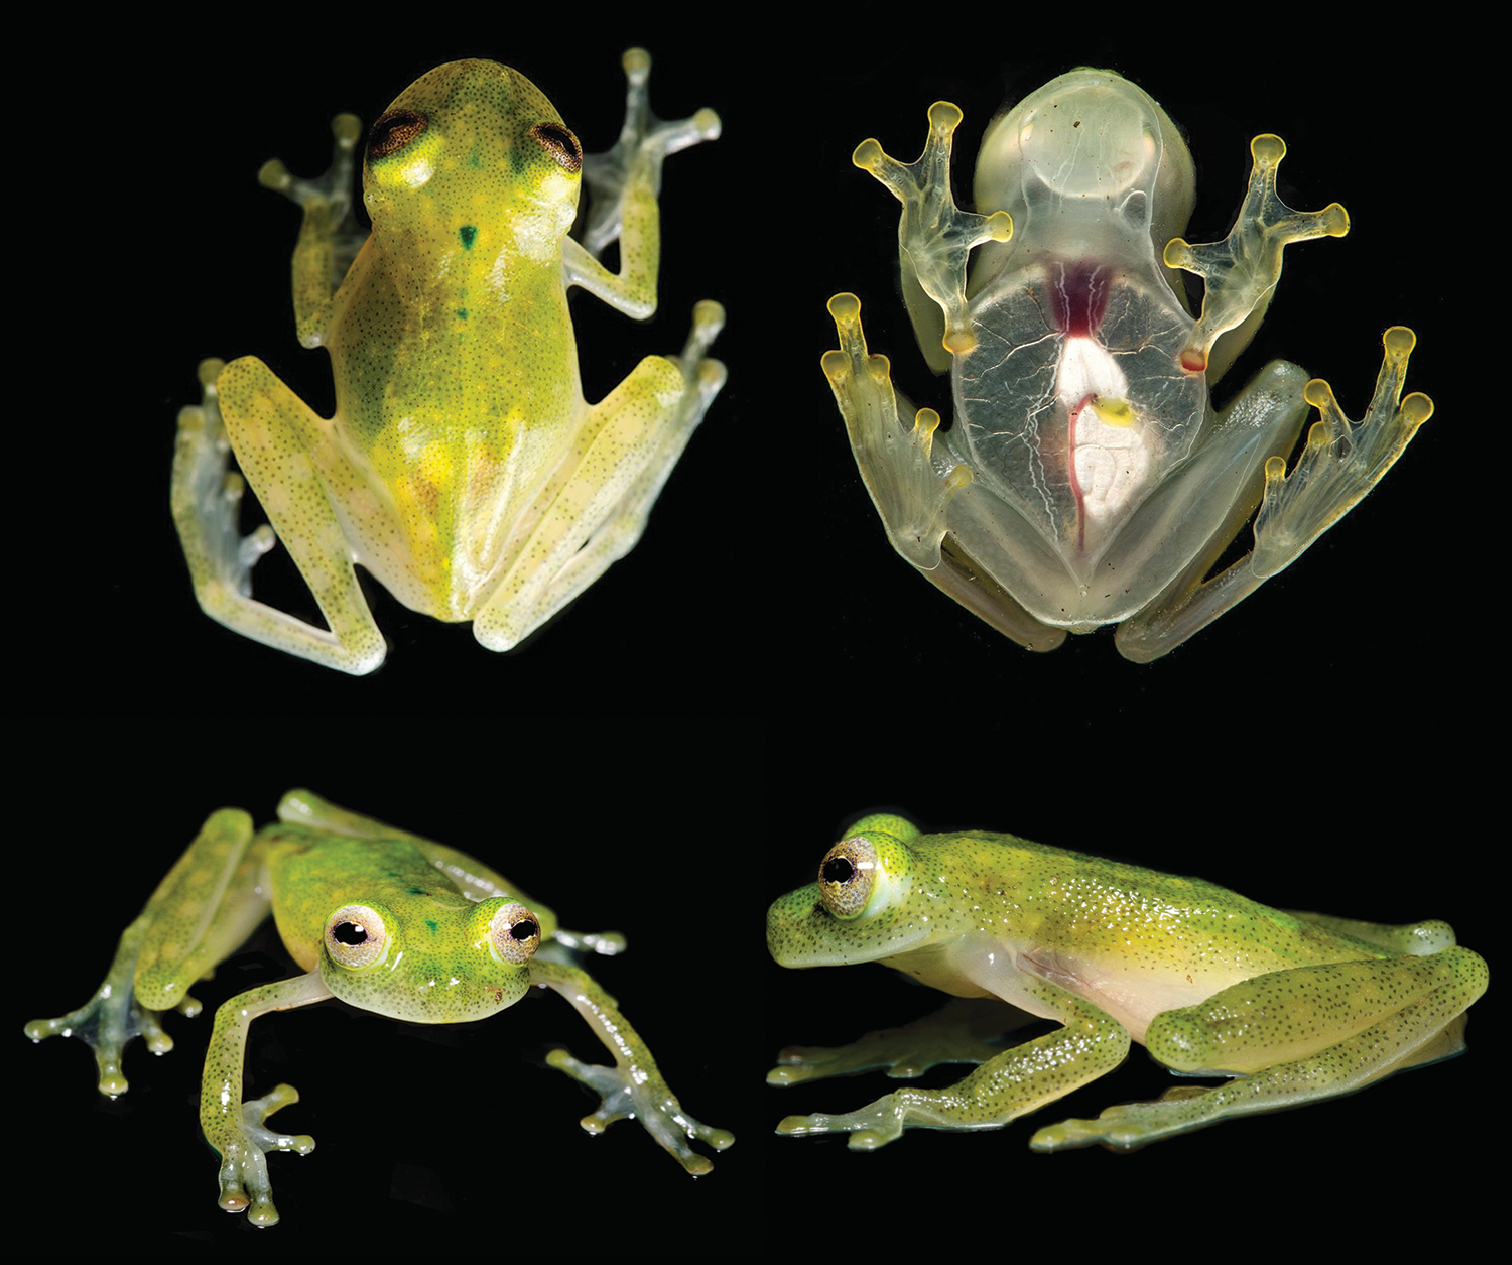 Have a look: The transparent Hyalinobatrachium yaku frog ((Collected by JC and Carlos Morochz ))